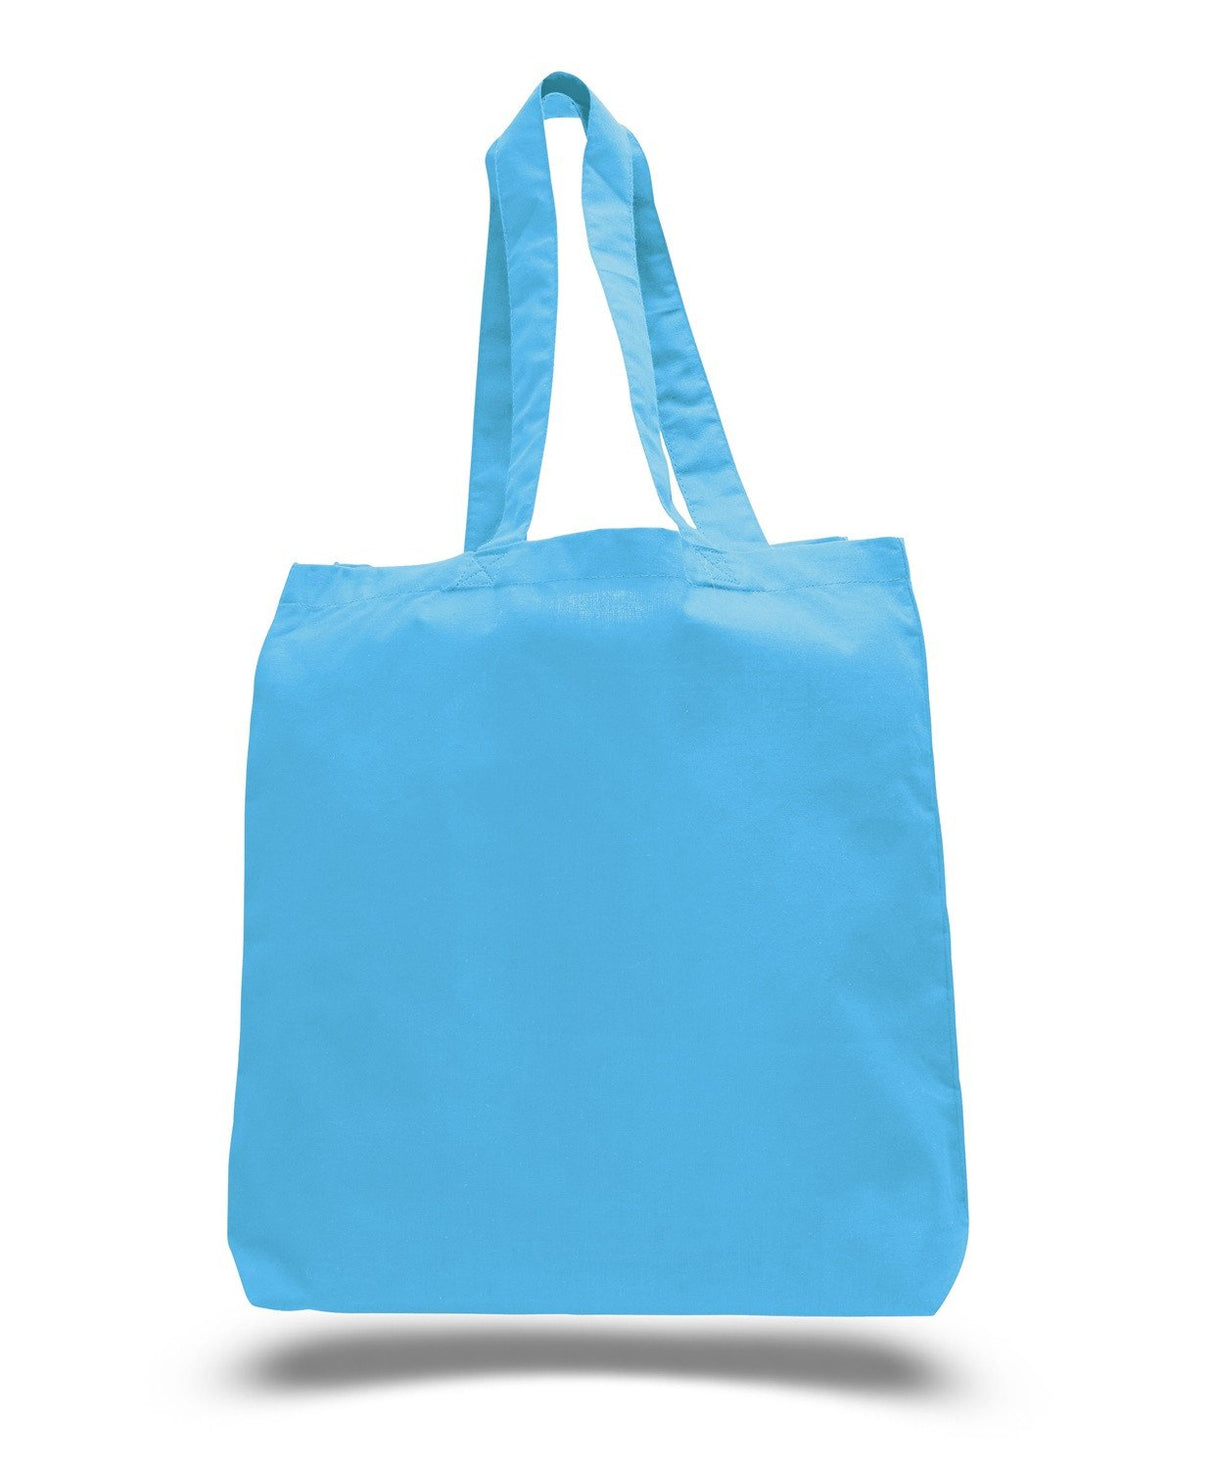 Turquoise Promotional Cotton Tote Bags W/ Gusset